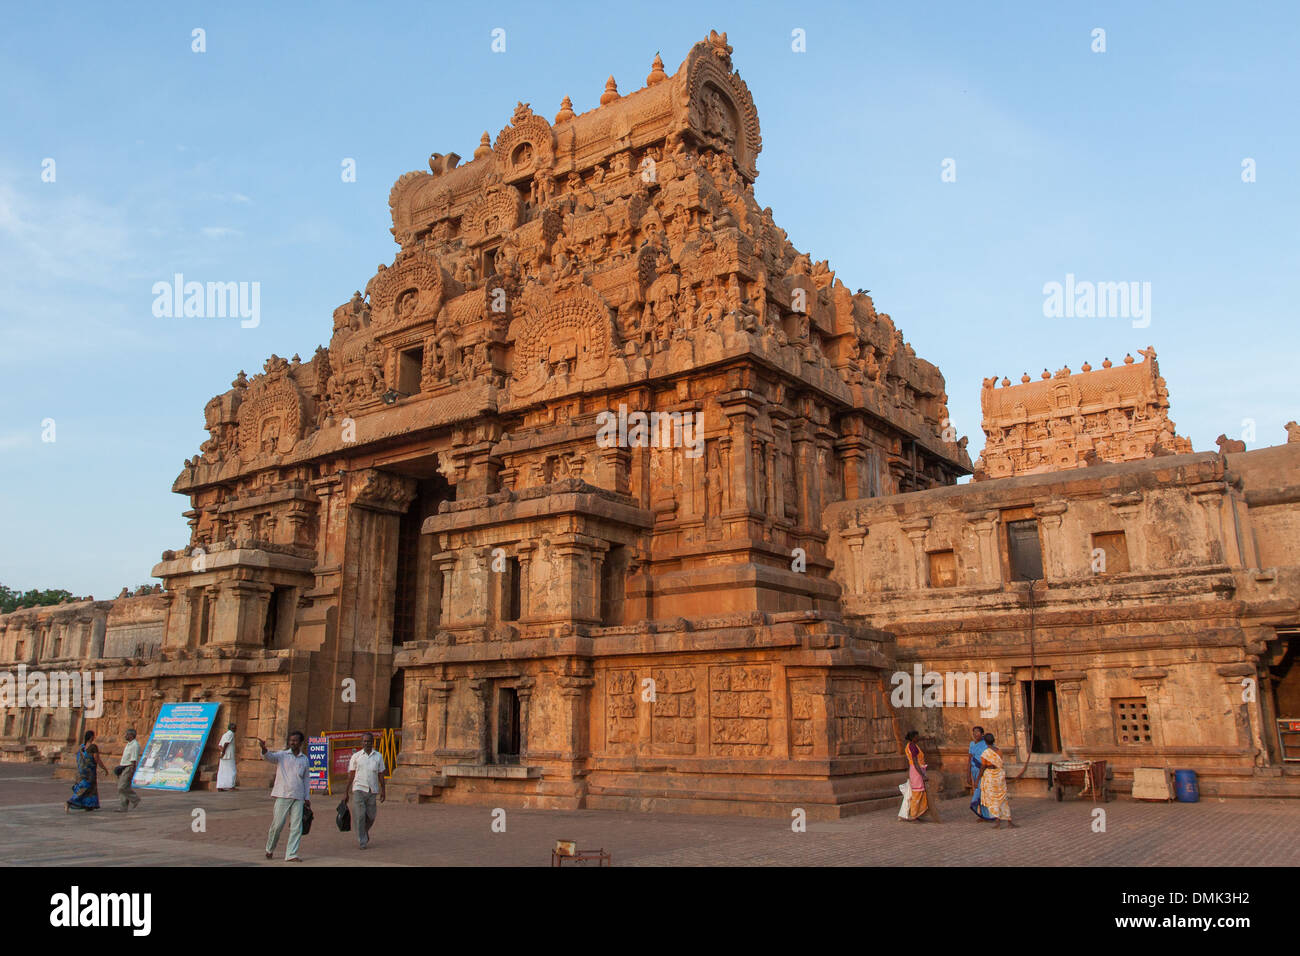 NIGHT FALLING OVER THE GOPURAMS OR THE GATES MARKING THE ENTRANCE TO THE TEMPLE OF BRIHADESVARA ALSO CALLED TEMPLE OF RAJARAJESHVARAM, LISTED AS A WORLD HERITAGE SITE BY UNESCO WITHIN THE CLASSIFICATION OF THE GREAT LIVING CHOLA TEMPLES, TANJAVUR, THANJAV Stock Photo